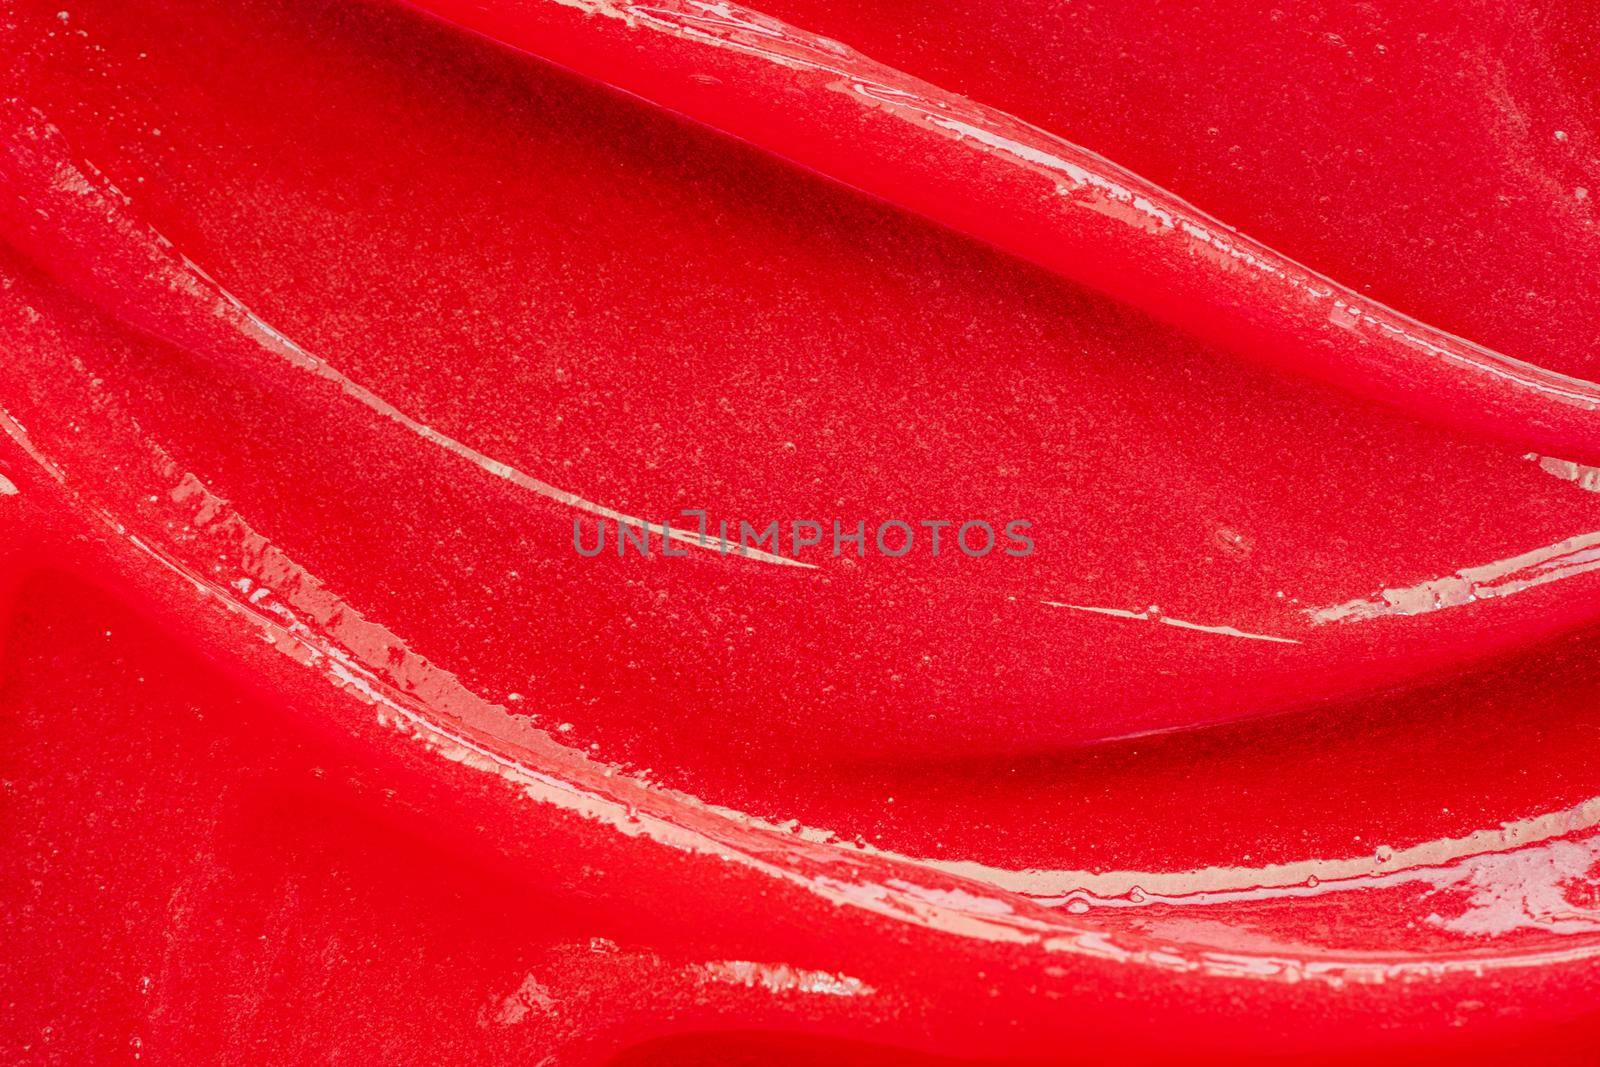 Red gel texture. Cosmetic clear liquid cream smudge. Skin care product sample closeup. Toothpaste or wax by photolime